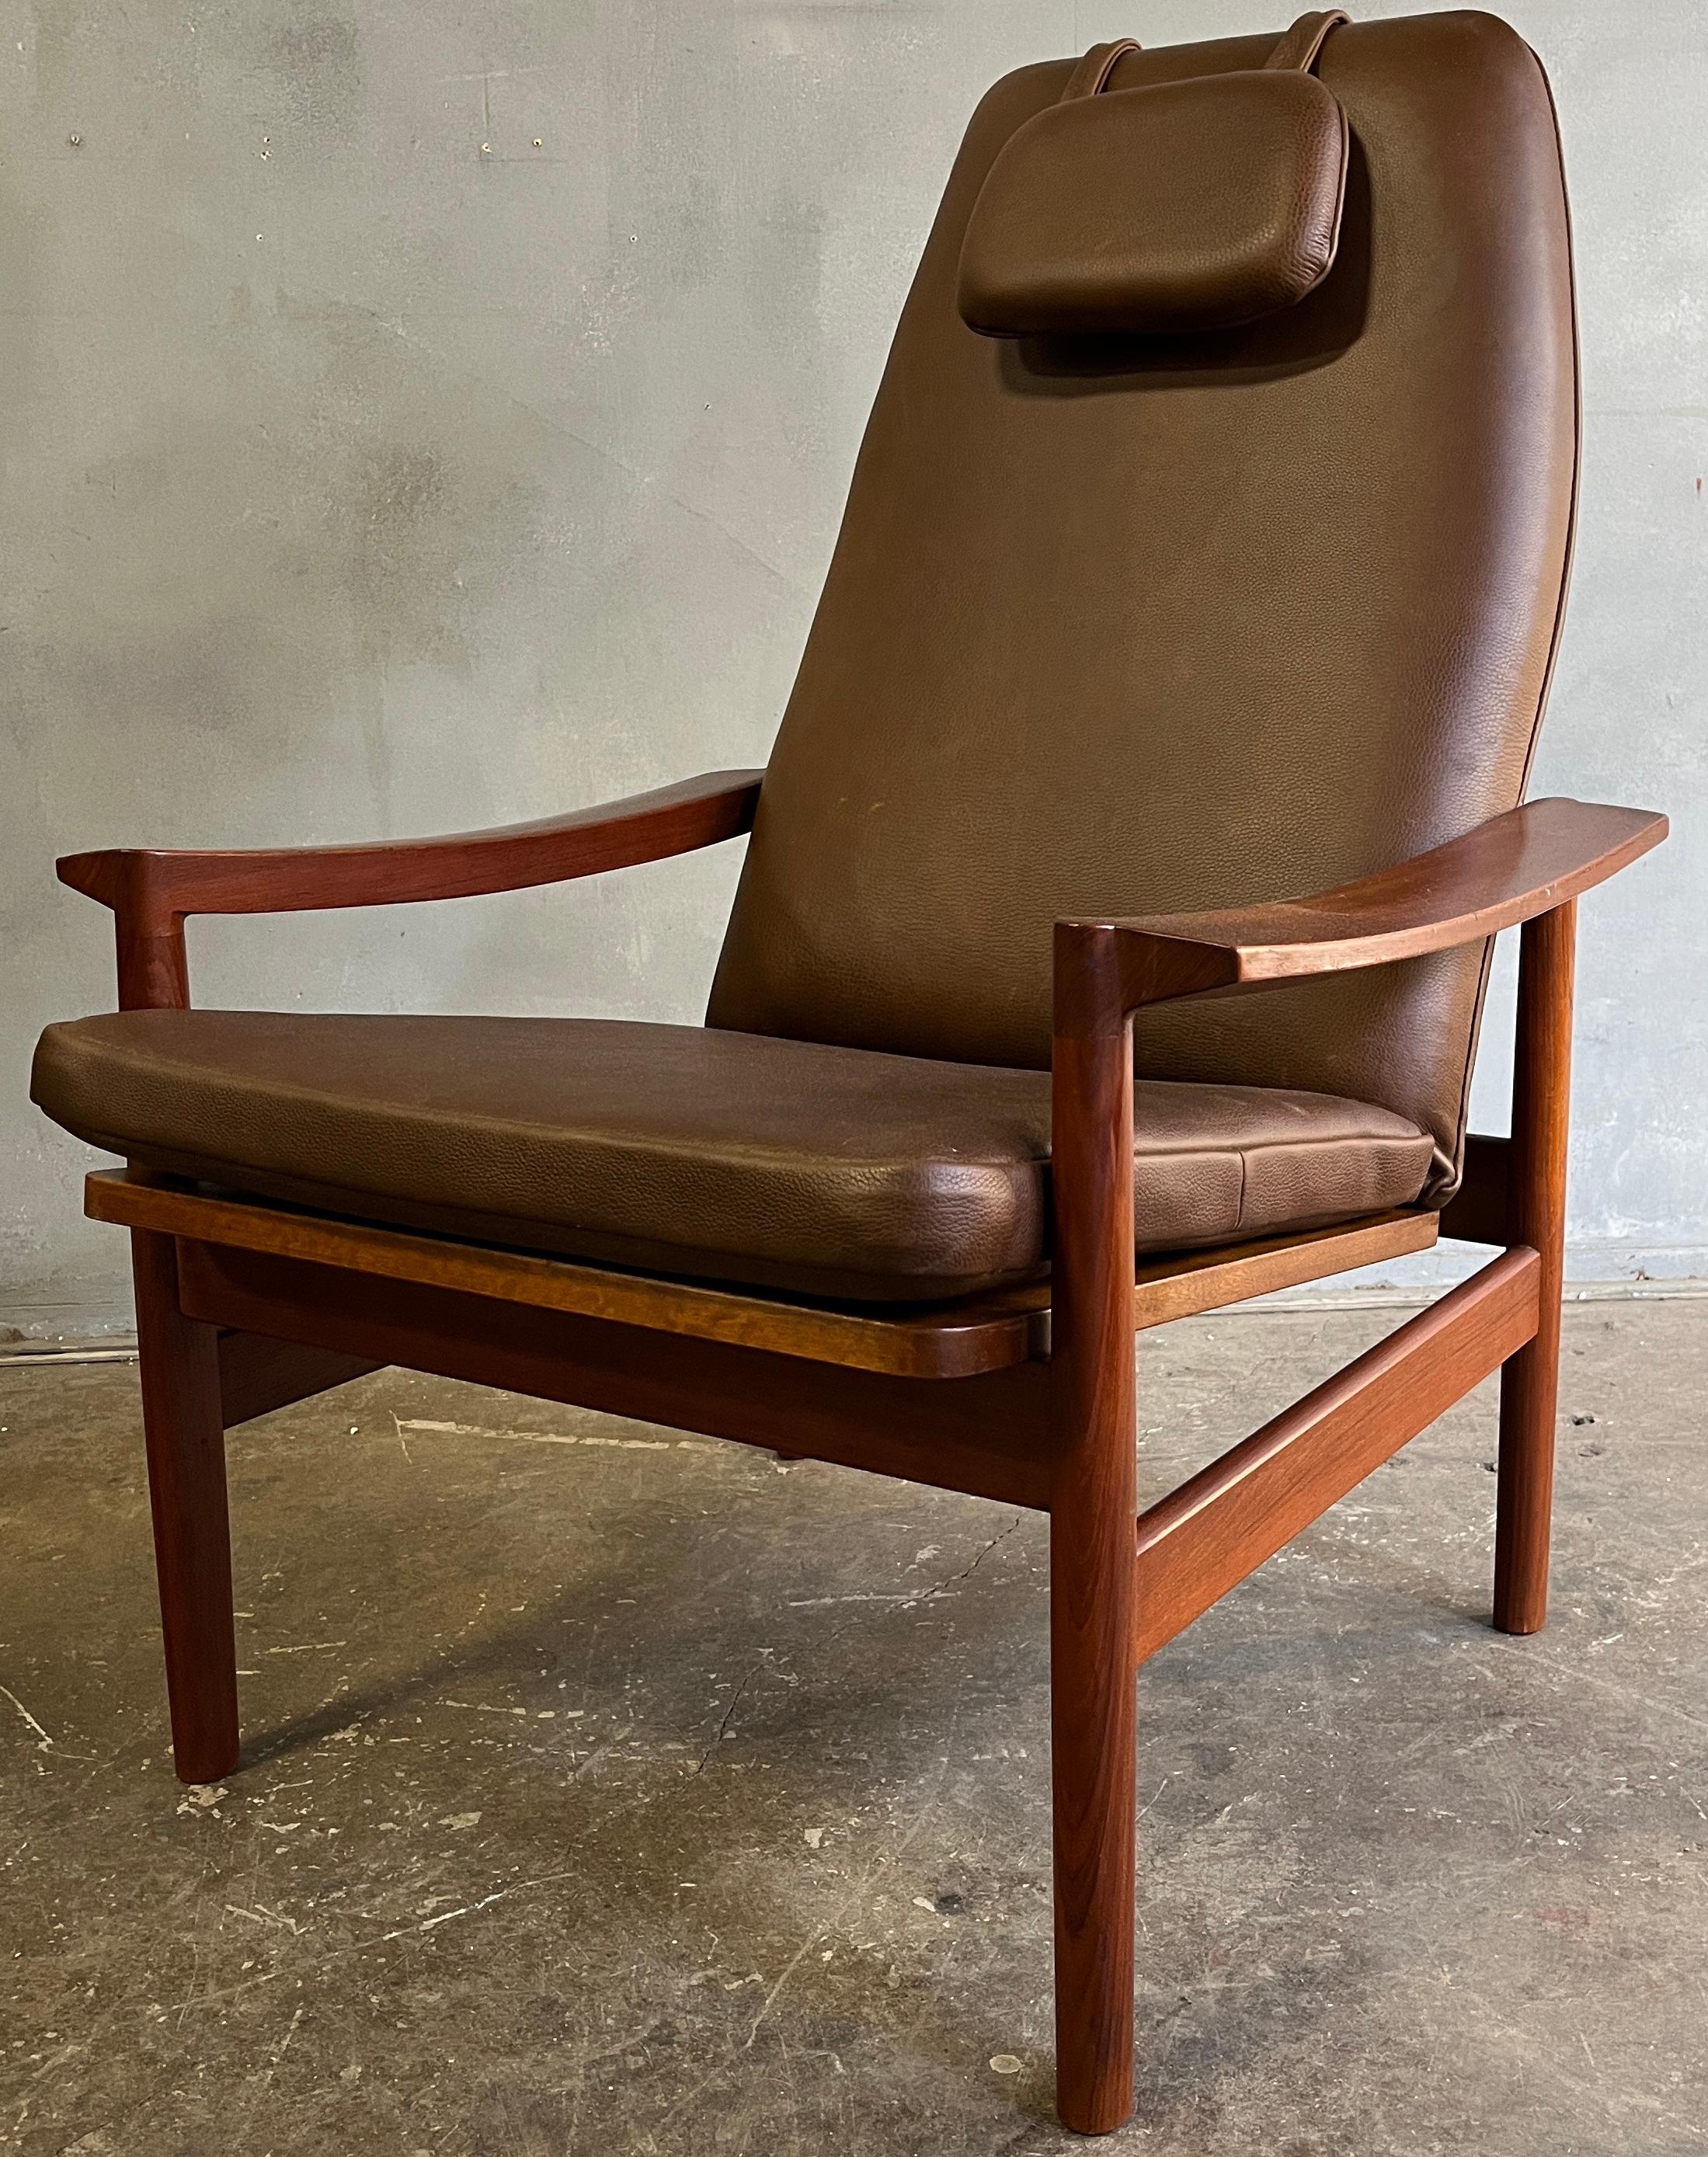 Scandinavian Modern Midcentury Lounge chair Teak and Leather For Sale